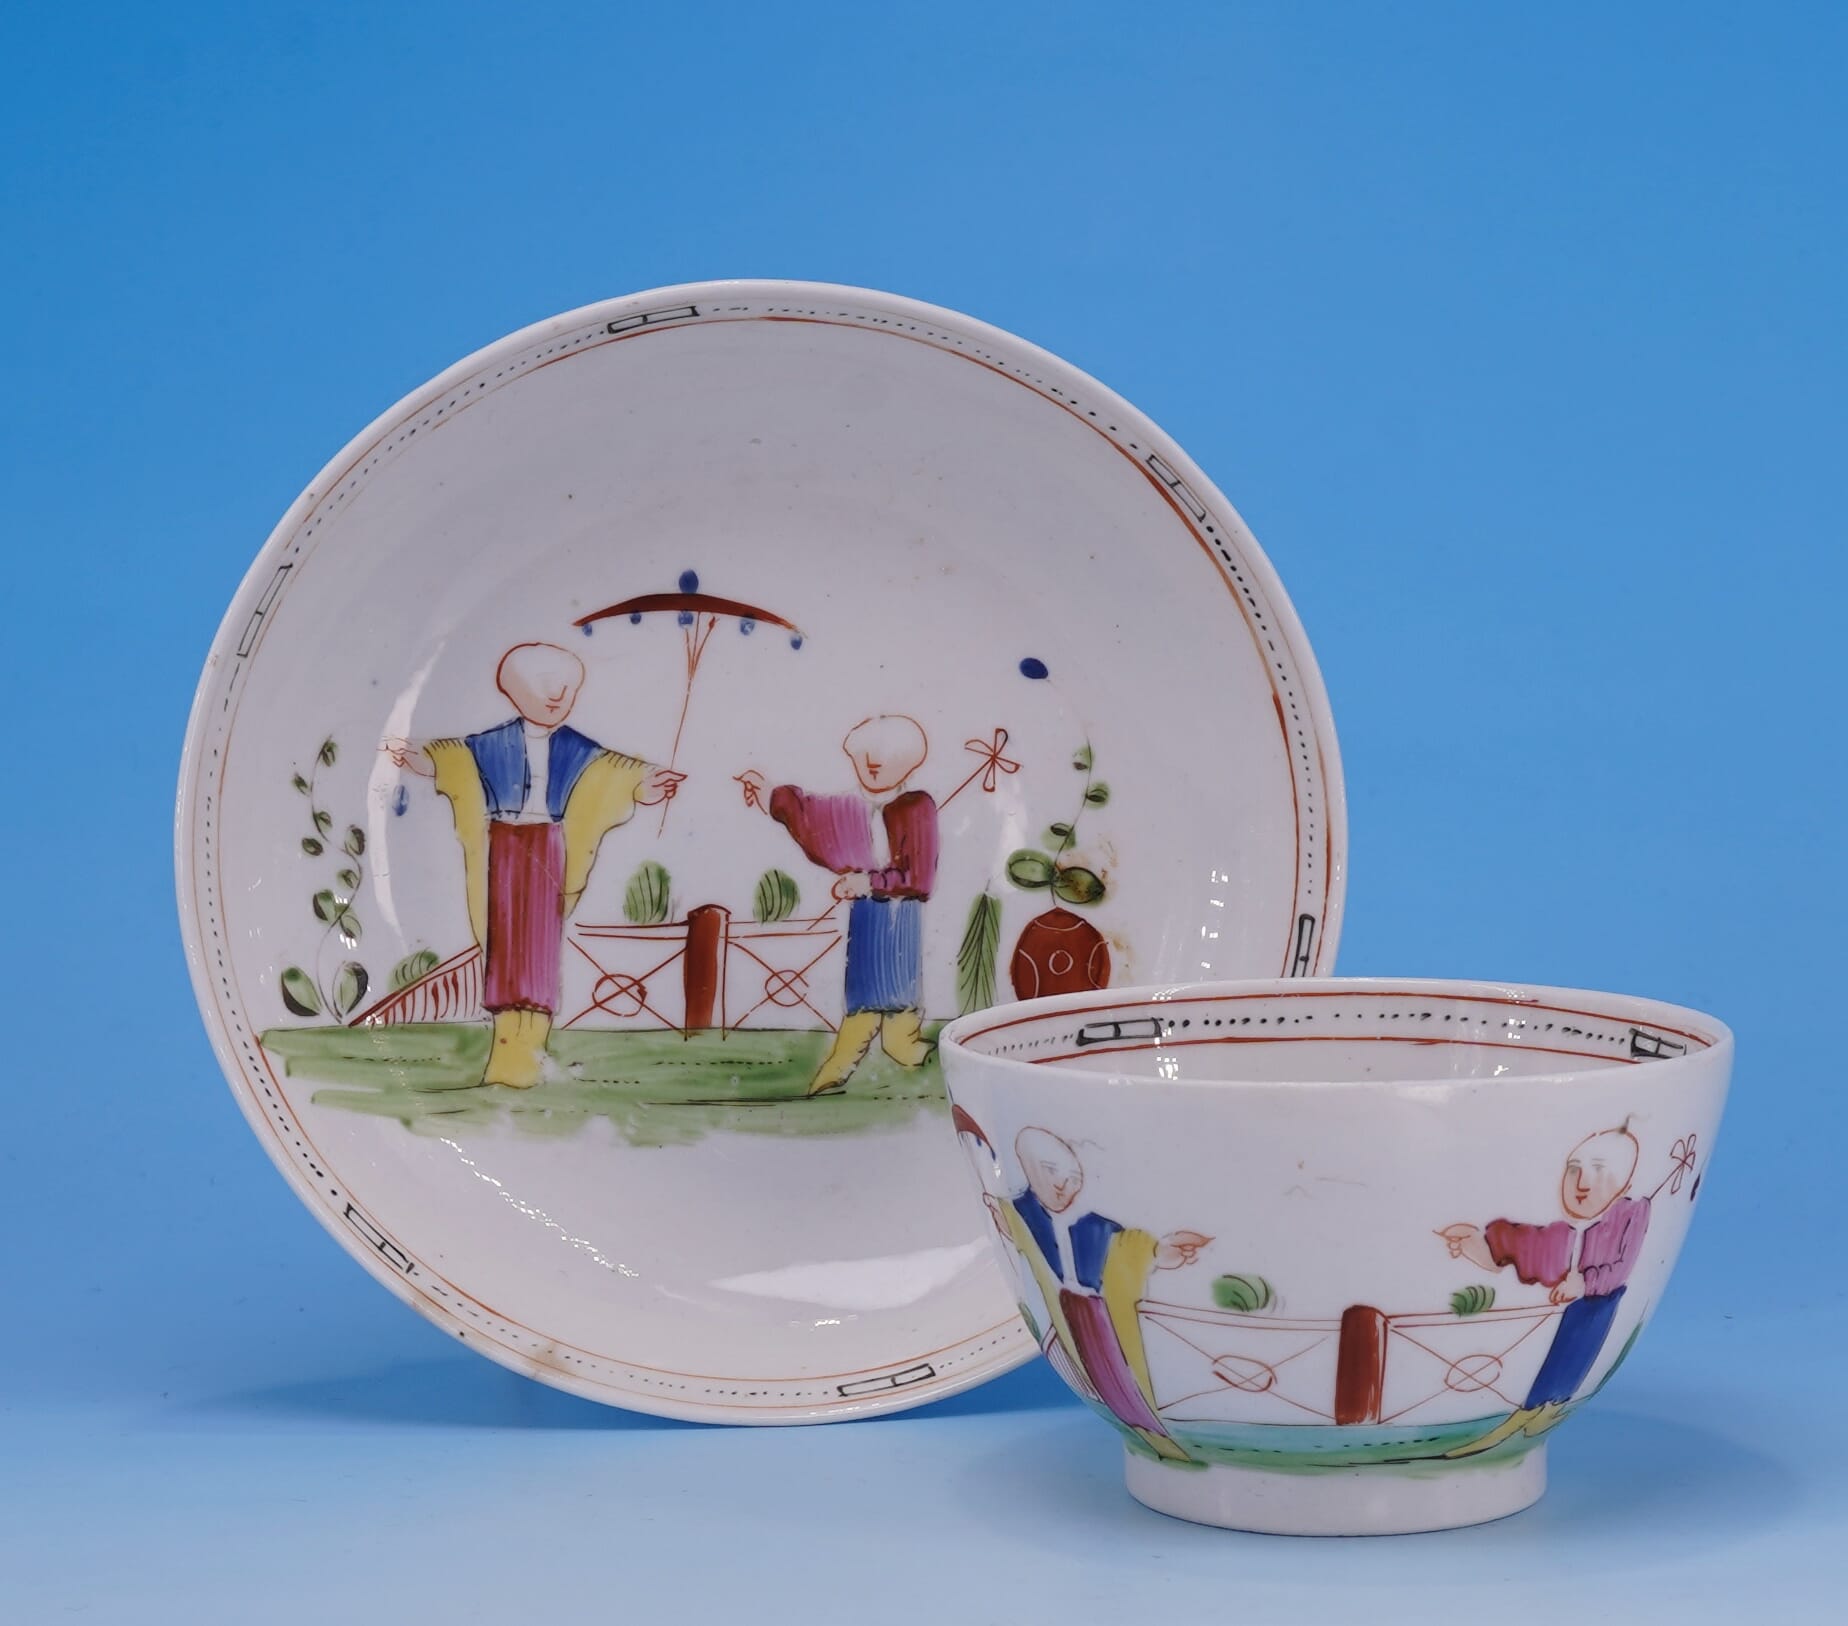 Factory Y teabowl & saucer, English Porcelain mystery factory